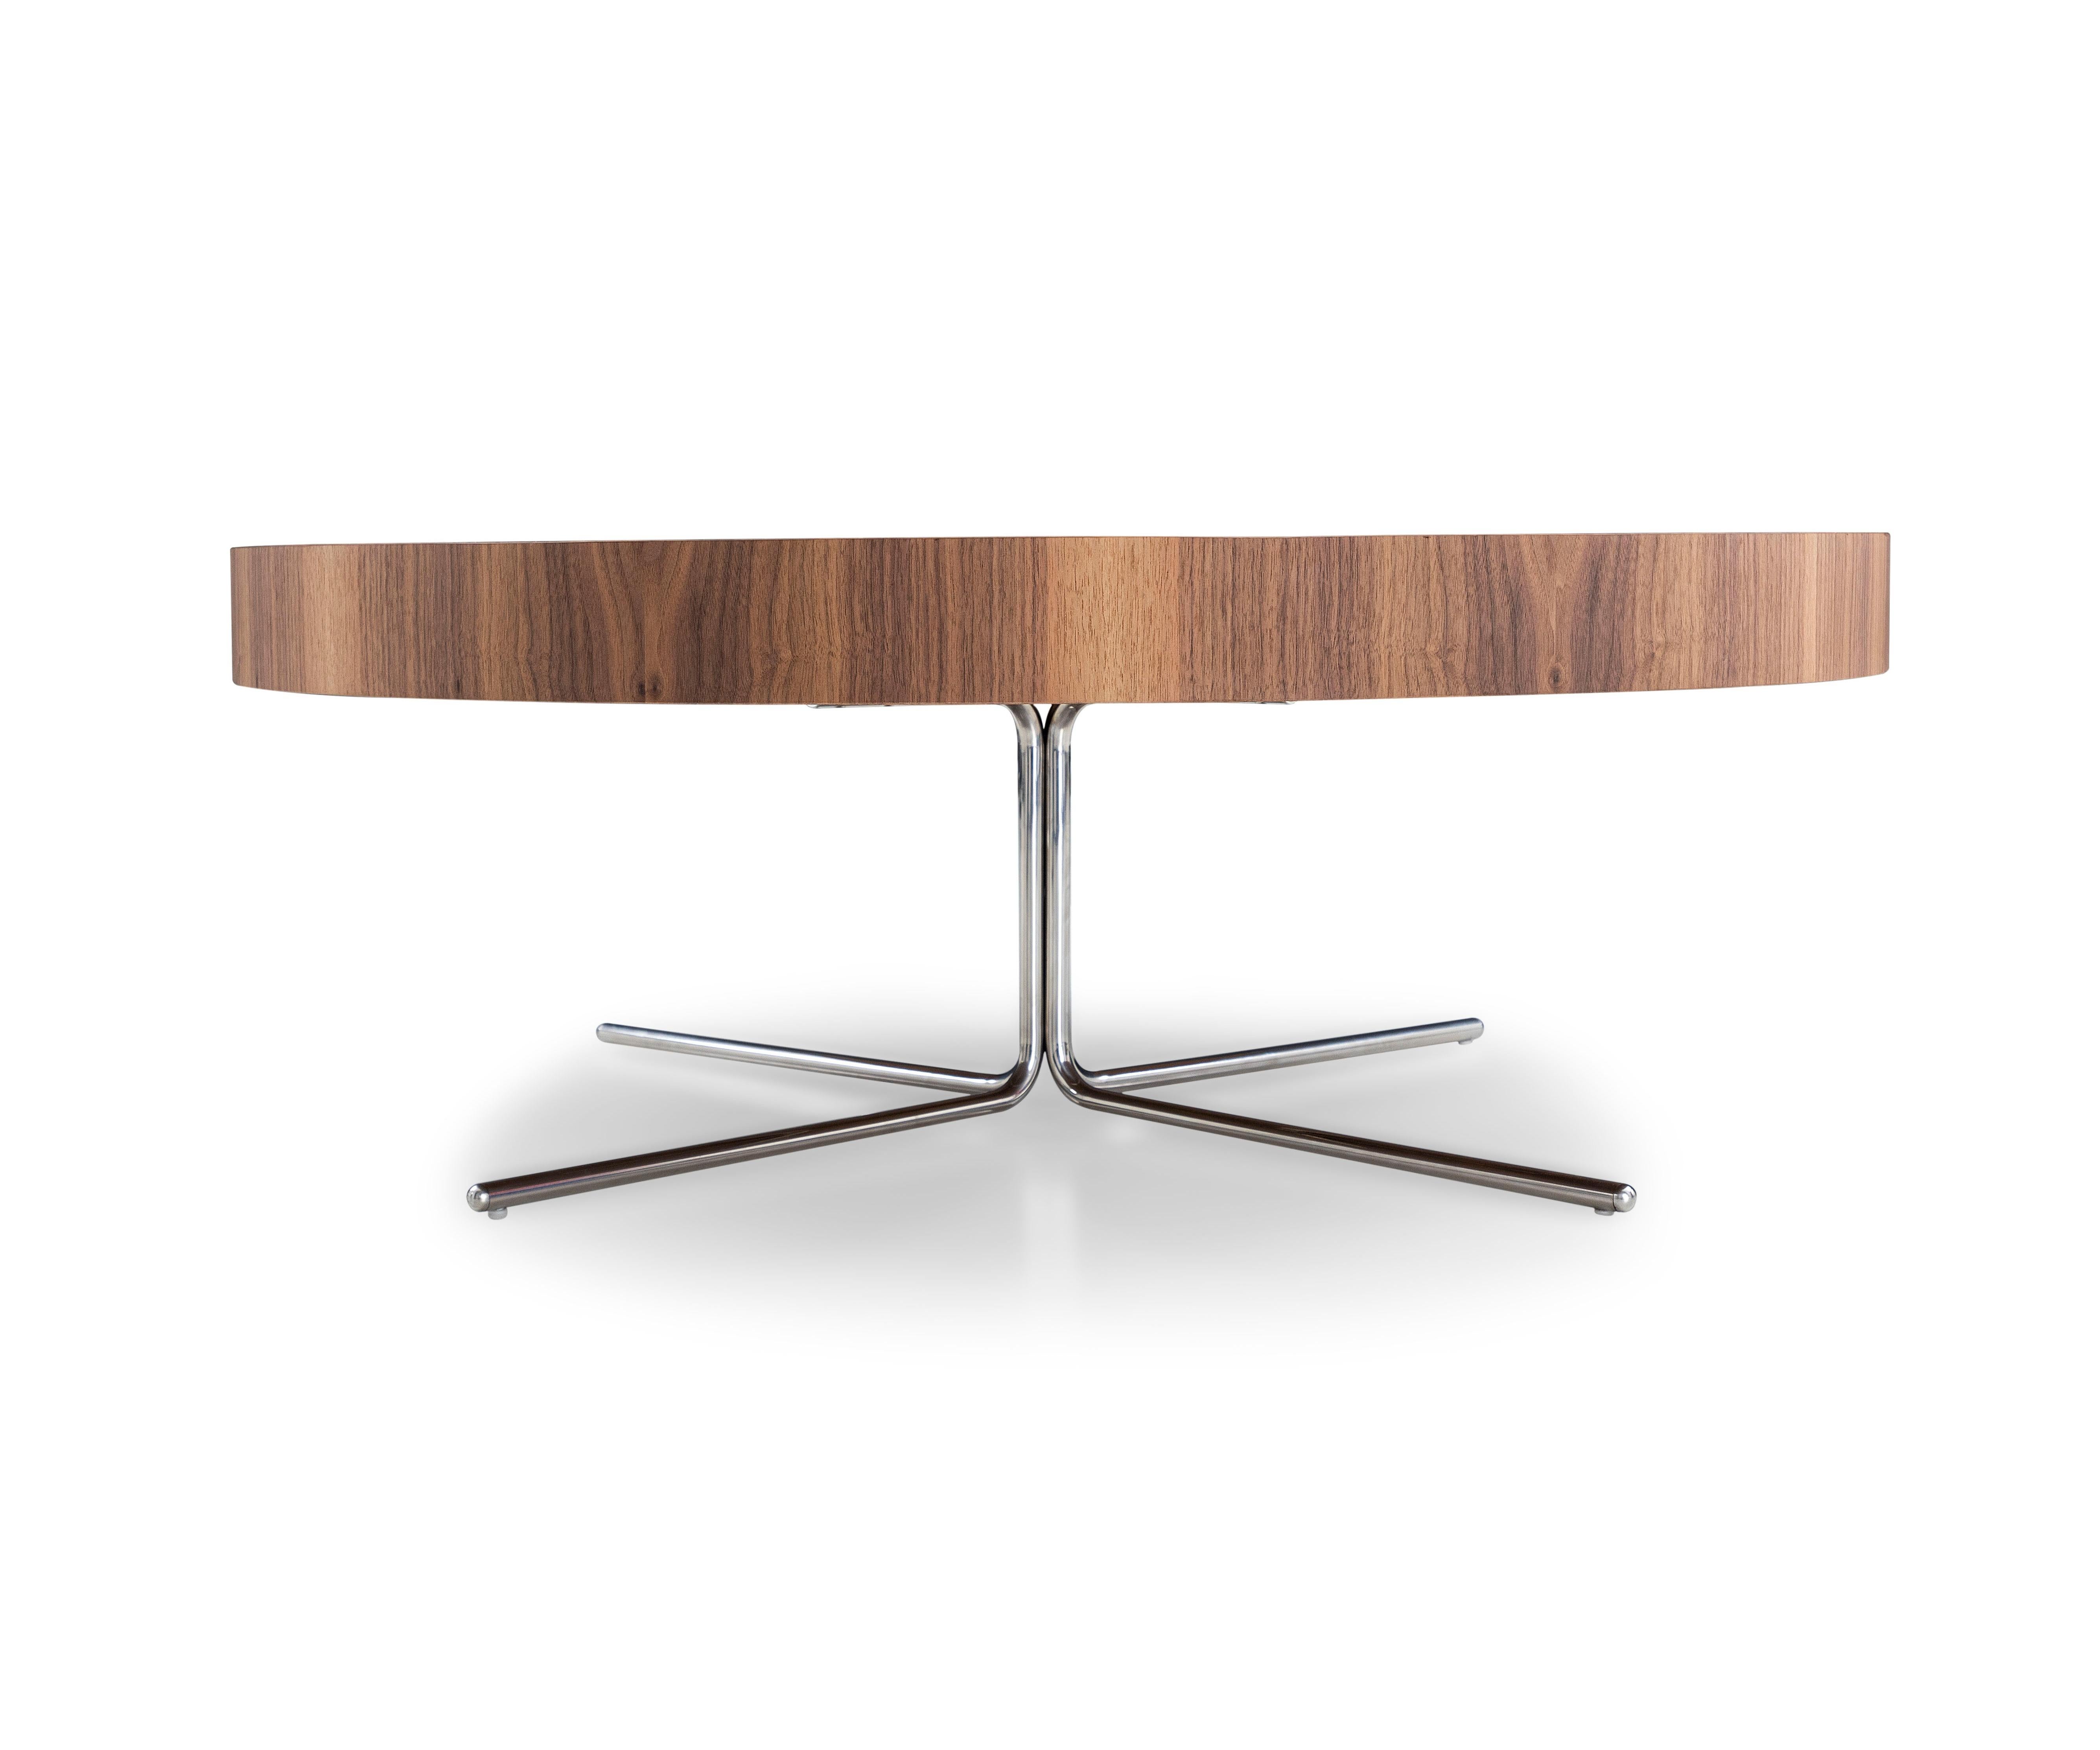 The stunning Regia occasional tables consist of a set of three tables with varying diameters and heights. The tabletop is imperial brown glass that imitates a beautiful brown marble with color veins running through it. Combined with a walnut rim and